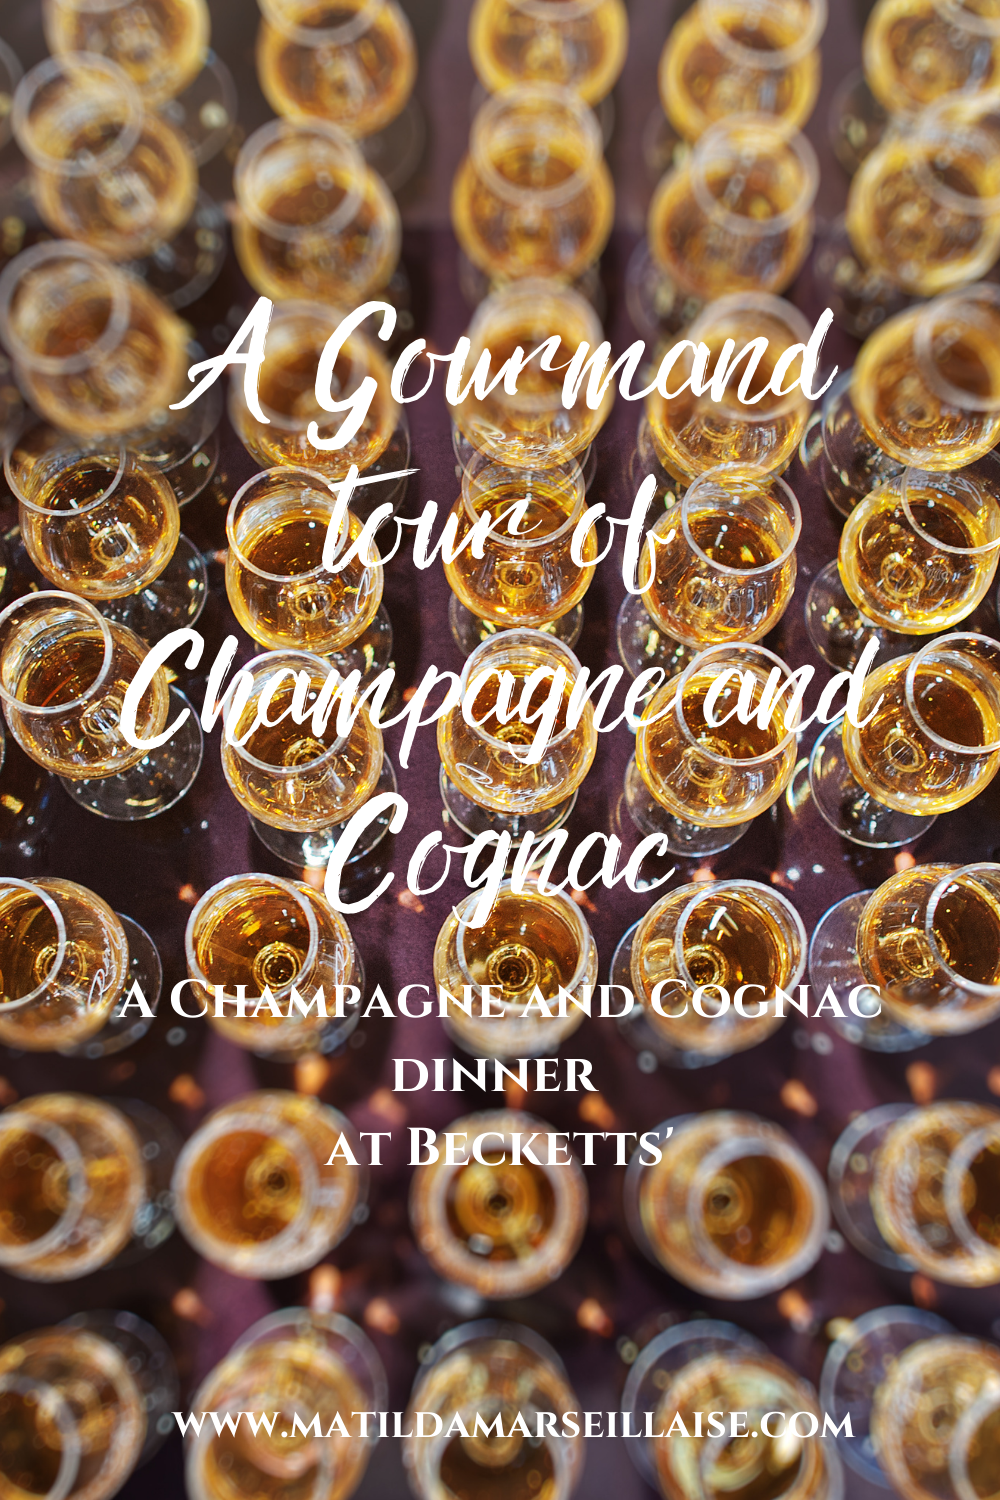 Join Beckett’s for a champagne and cognac dinner next Thursday